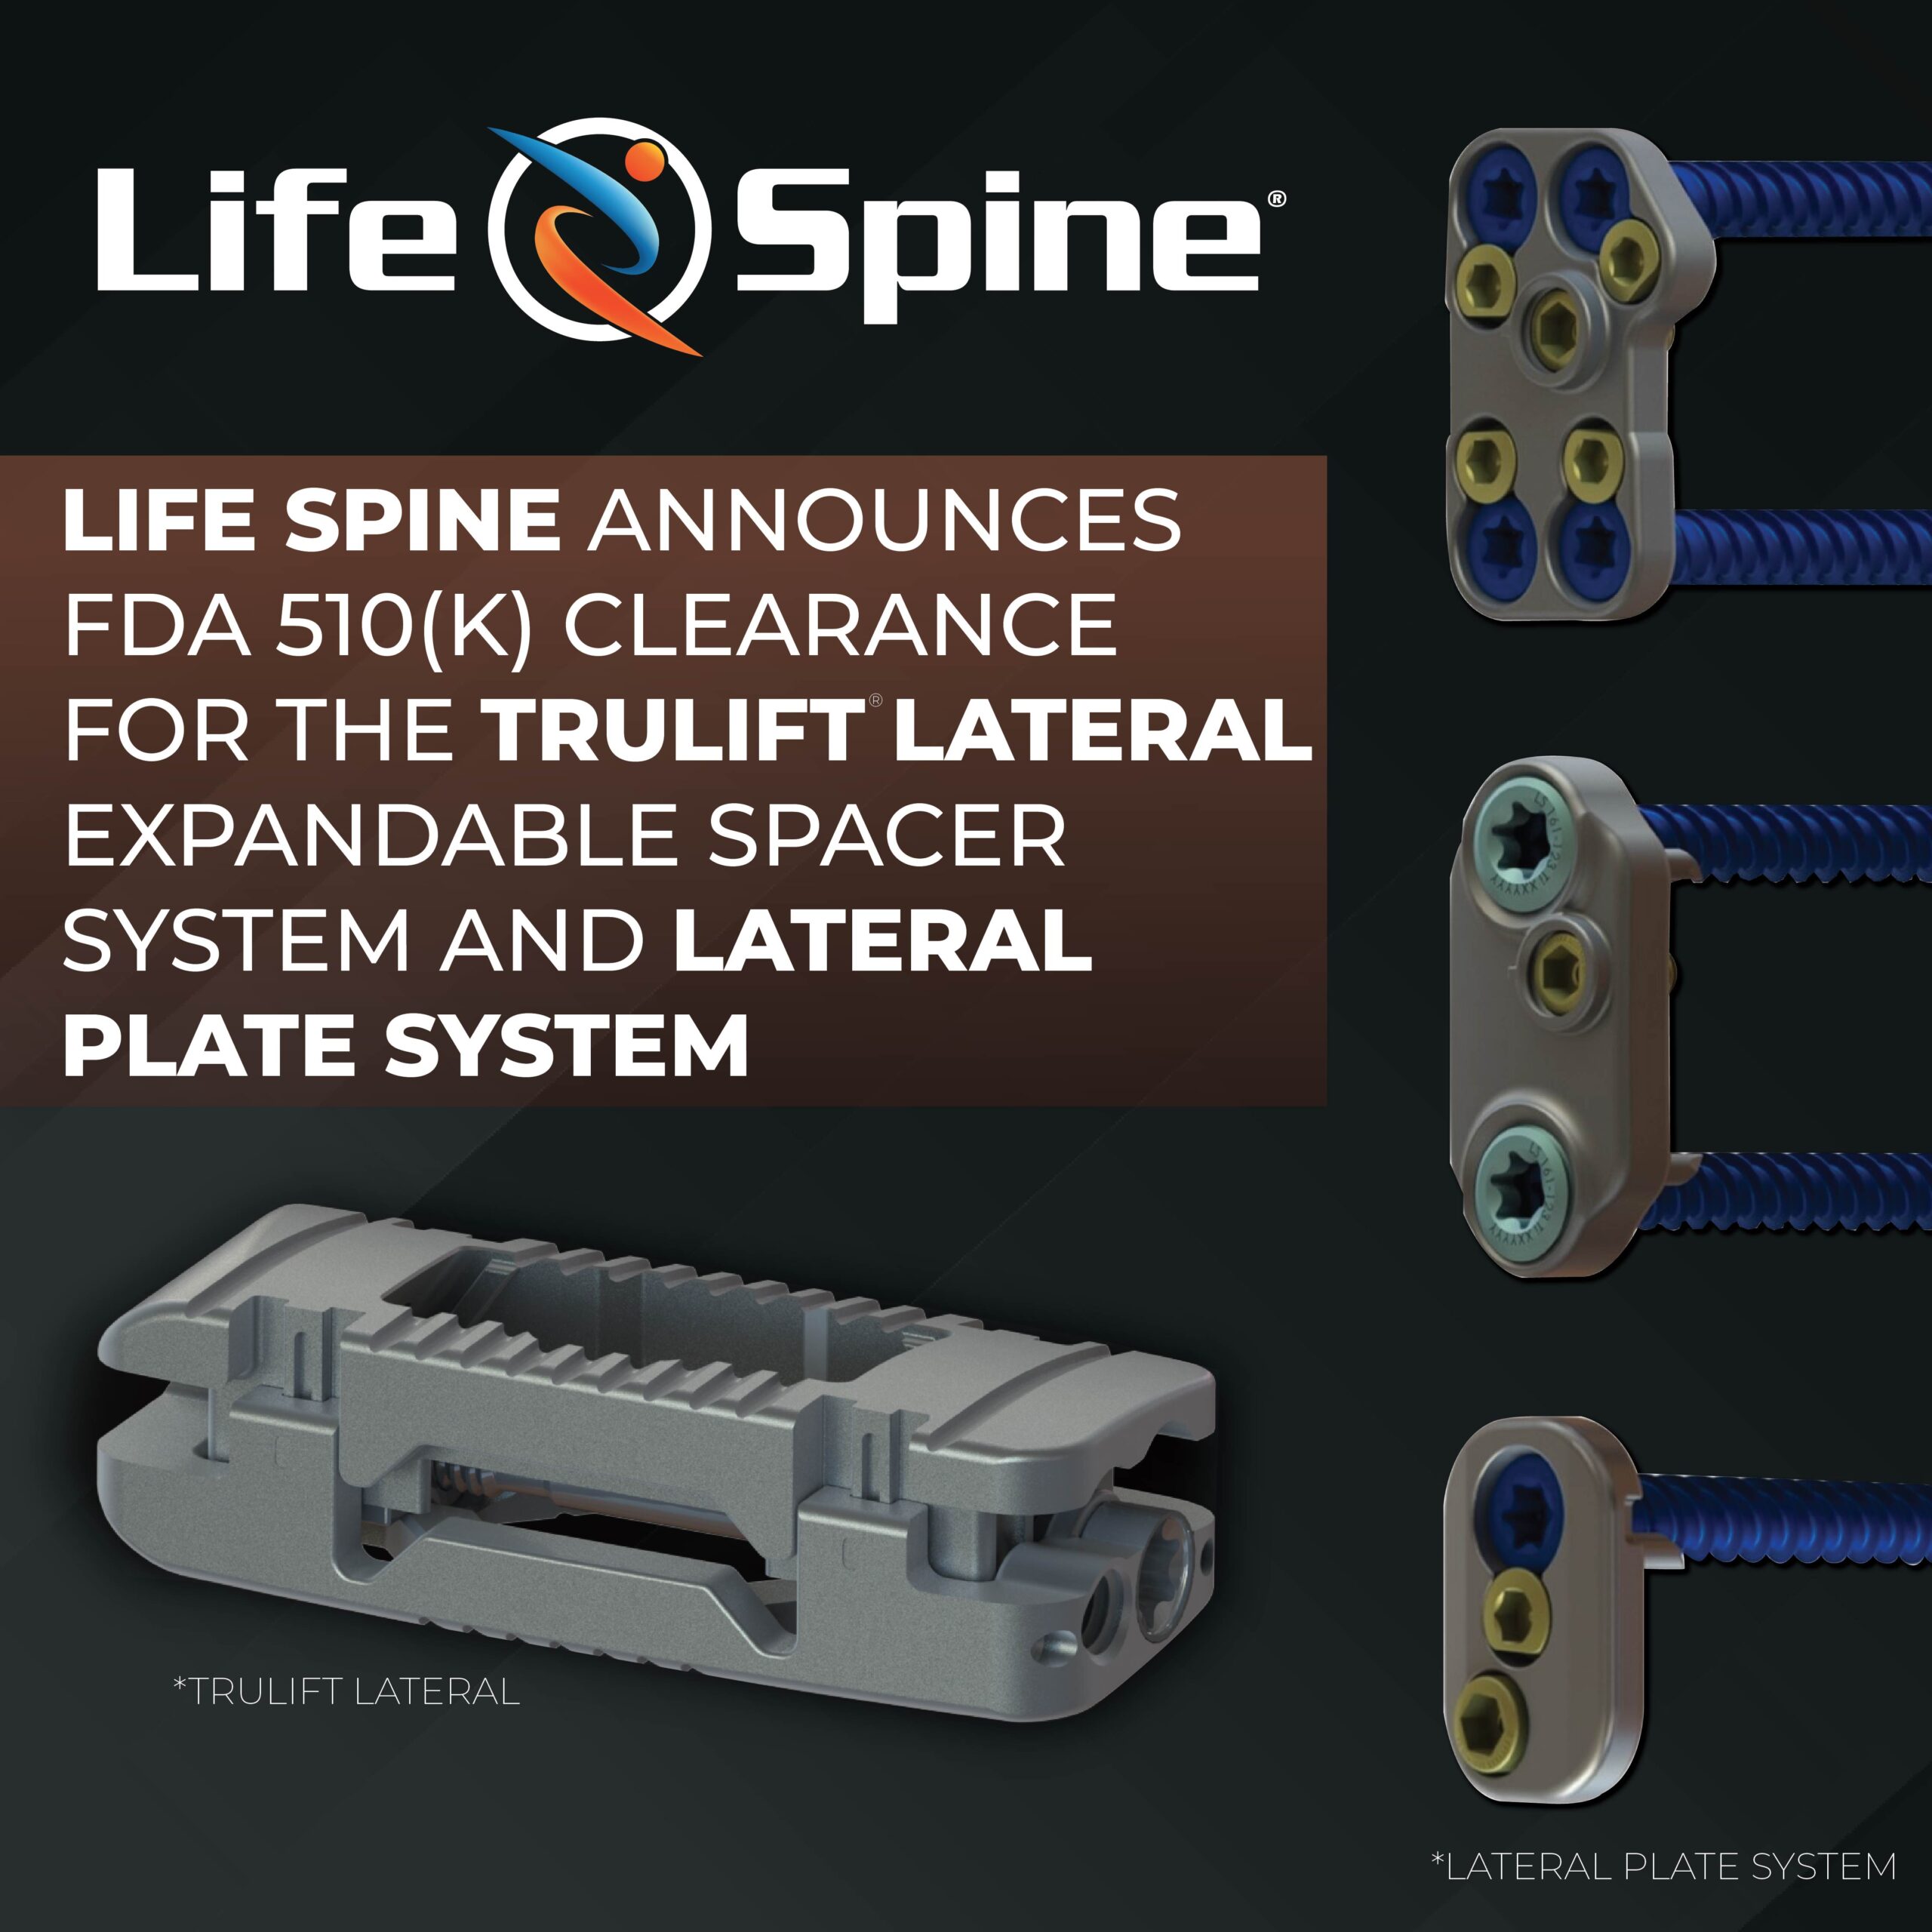 LIFE SPINE ANNOUNCES FDA 510(K) CLEARANCE FOR THE TRULIFT® LATERAL EXPANDABLE SPACER SYSTEM AND LATERAL PLATE SYSTEM